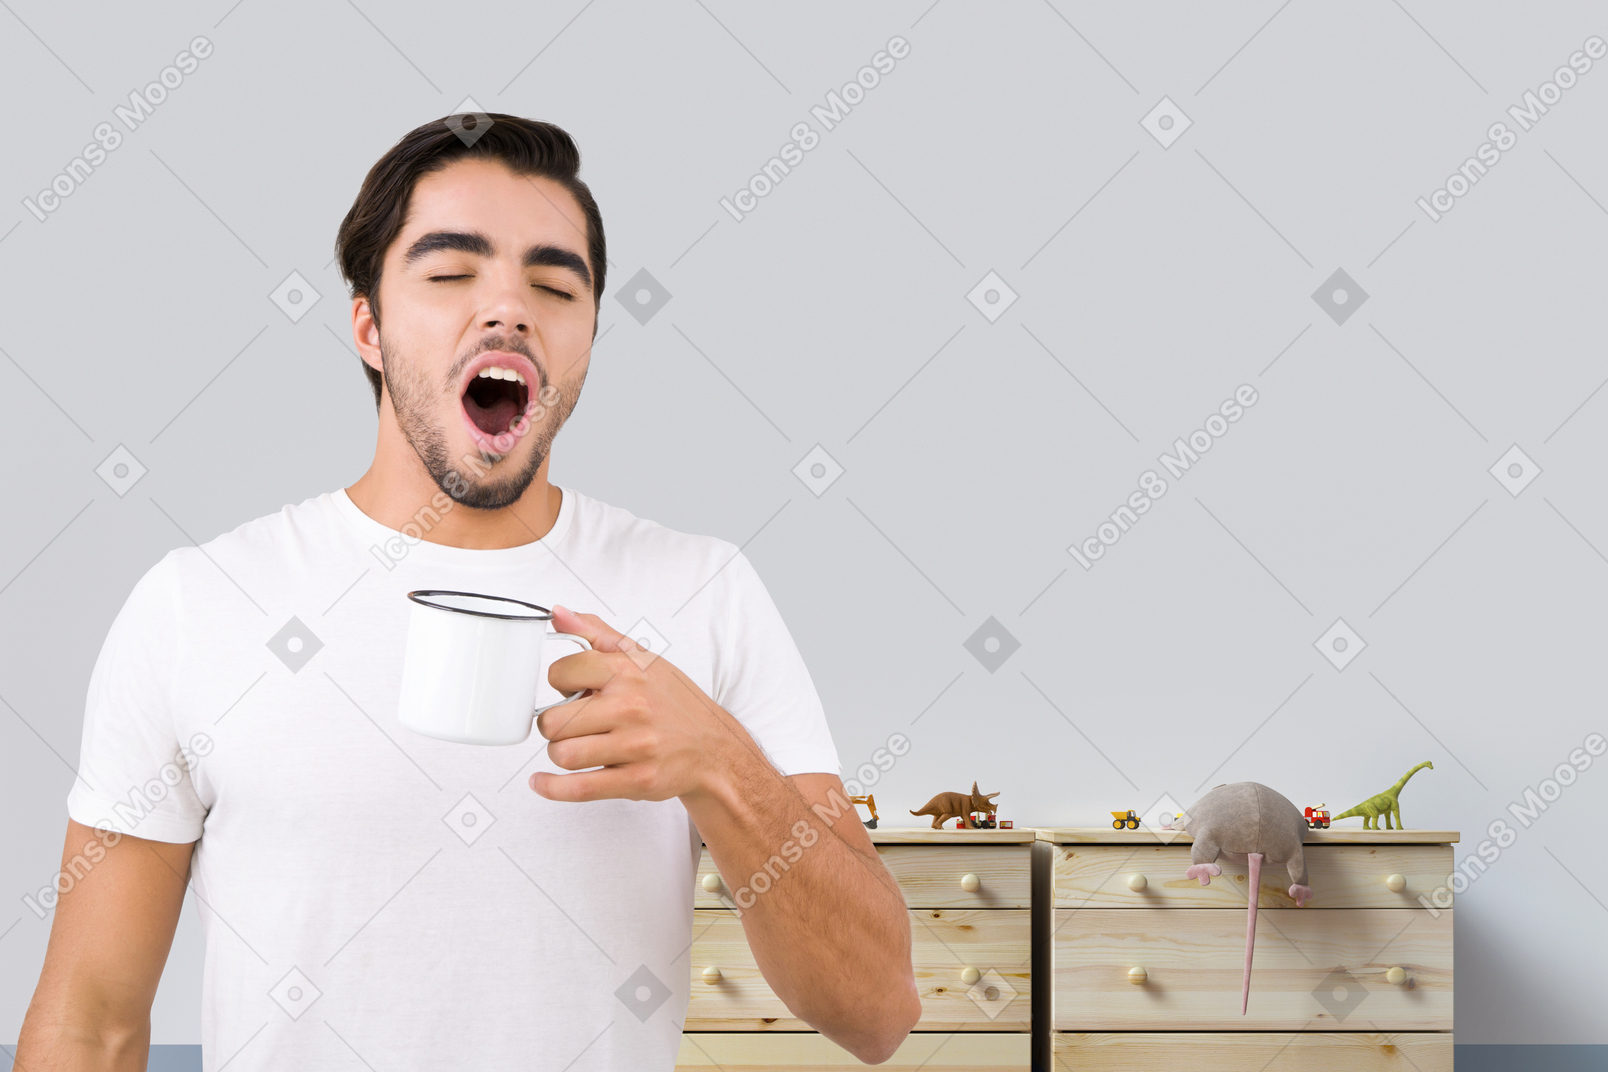 Yawning man holding a cup of coffee